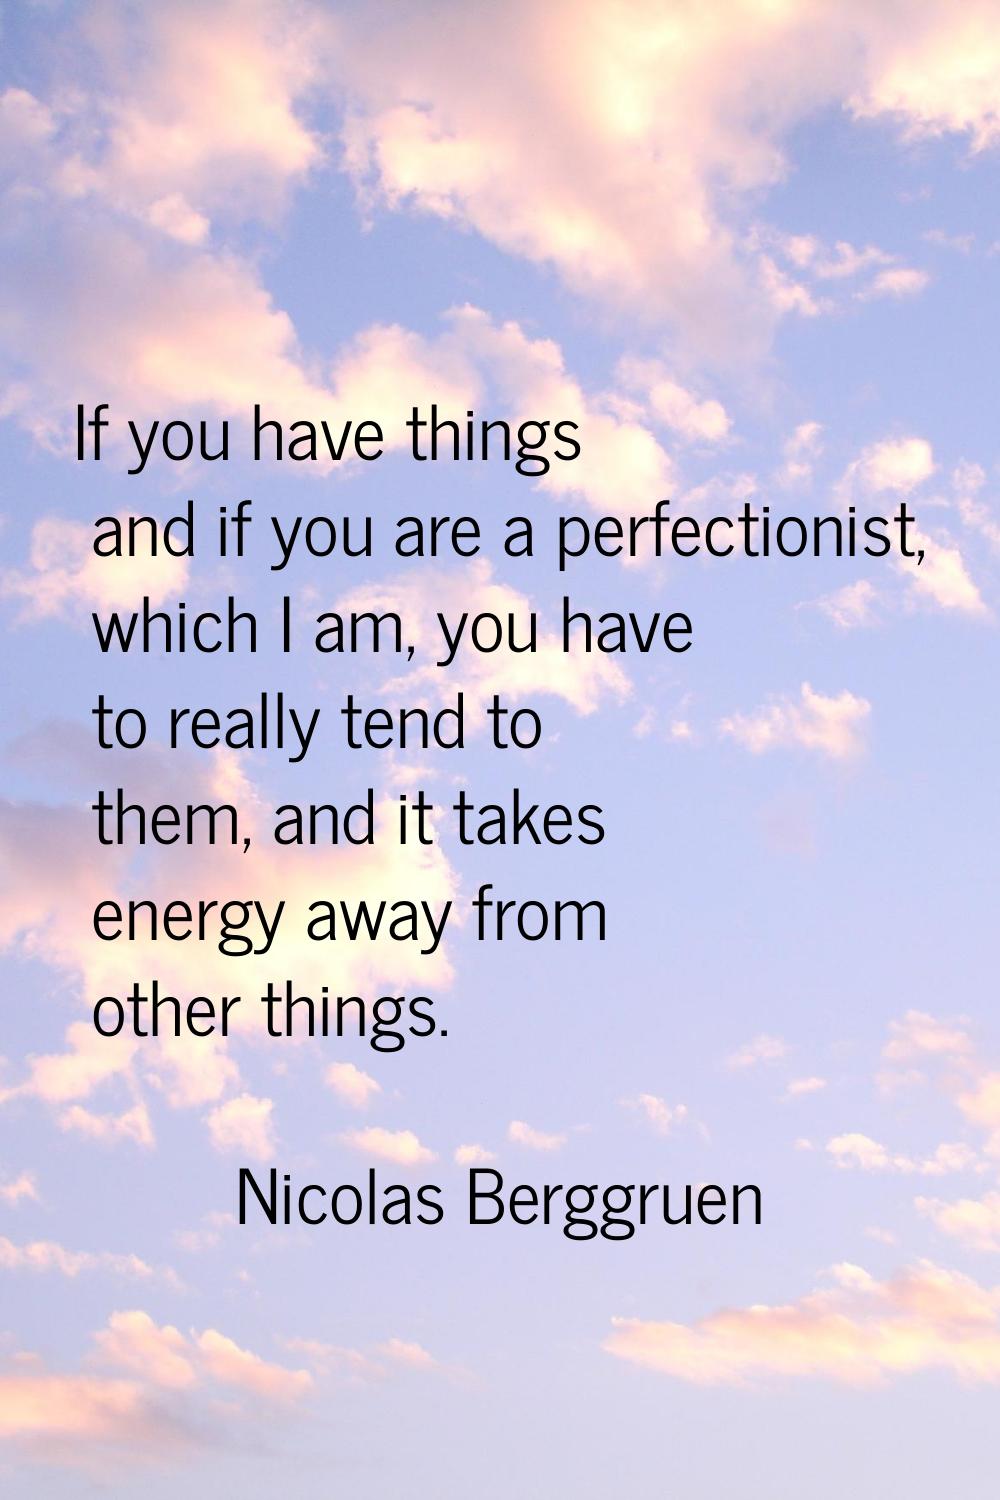 If you have things and if you are a perfectionist, which I am, you have to really tend to them, and